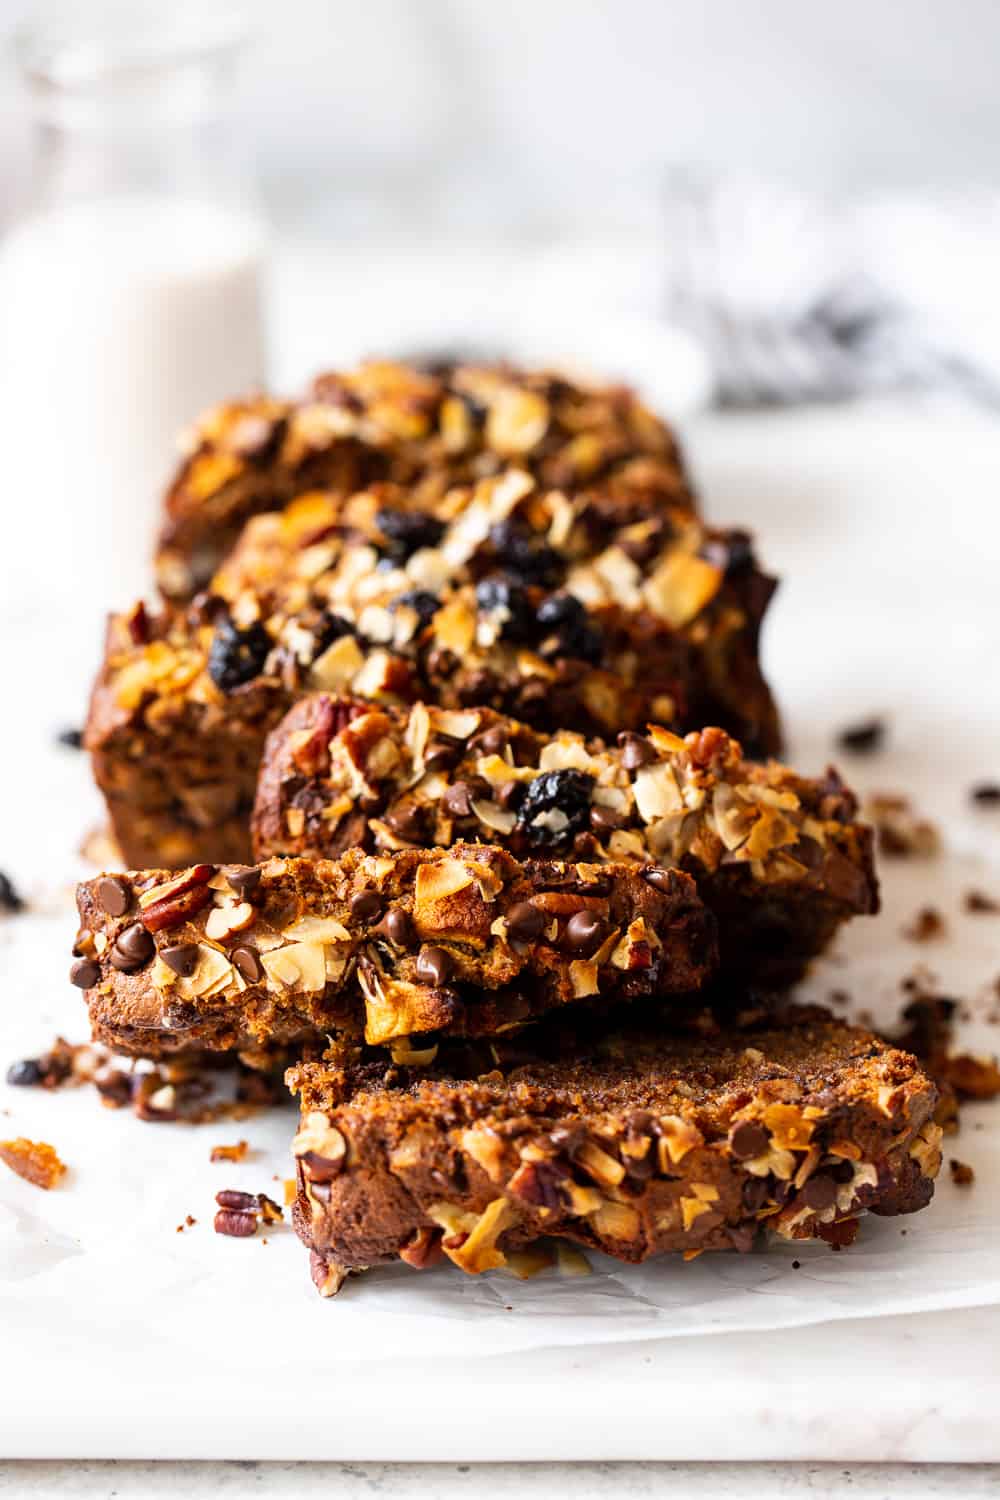 This grain free trail mix bread is a fun twist on a simple paleo quick bread! It’s loaded with warm spices, dried fruit, nuts and coconut, and sweetened with maple syrup and coconut sugar. It’s perfect to slather with nut butter for breakfast or for an anytime snack! Gluten free, refined sugar free, paleo, dairy free. #paleo #glutenfree #paleobaking #cleaneating 